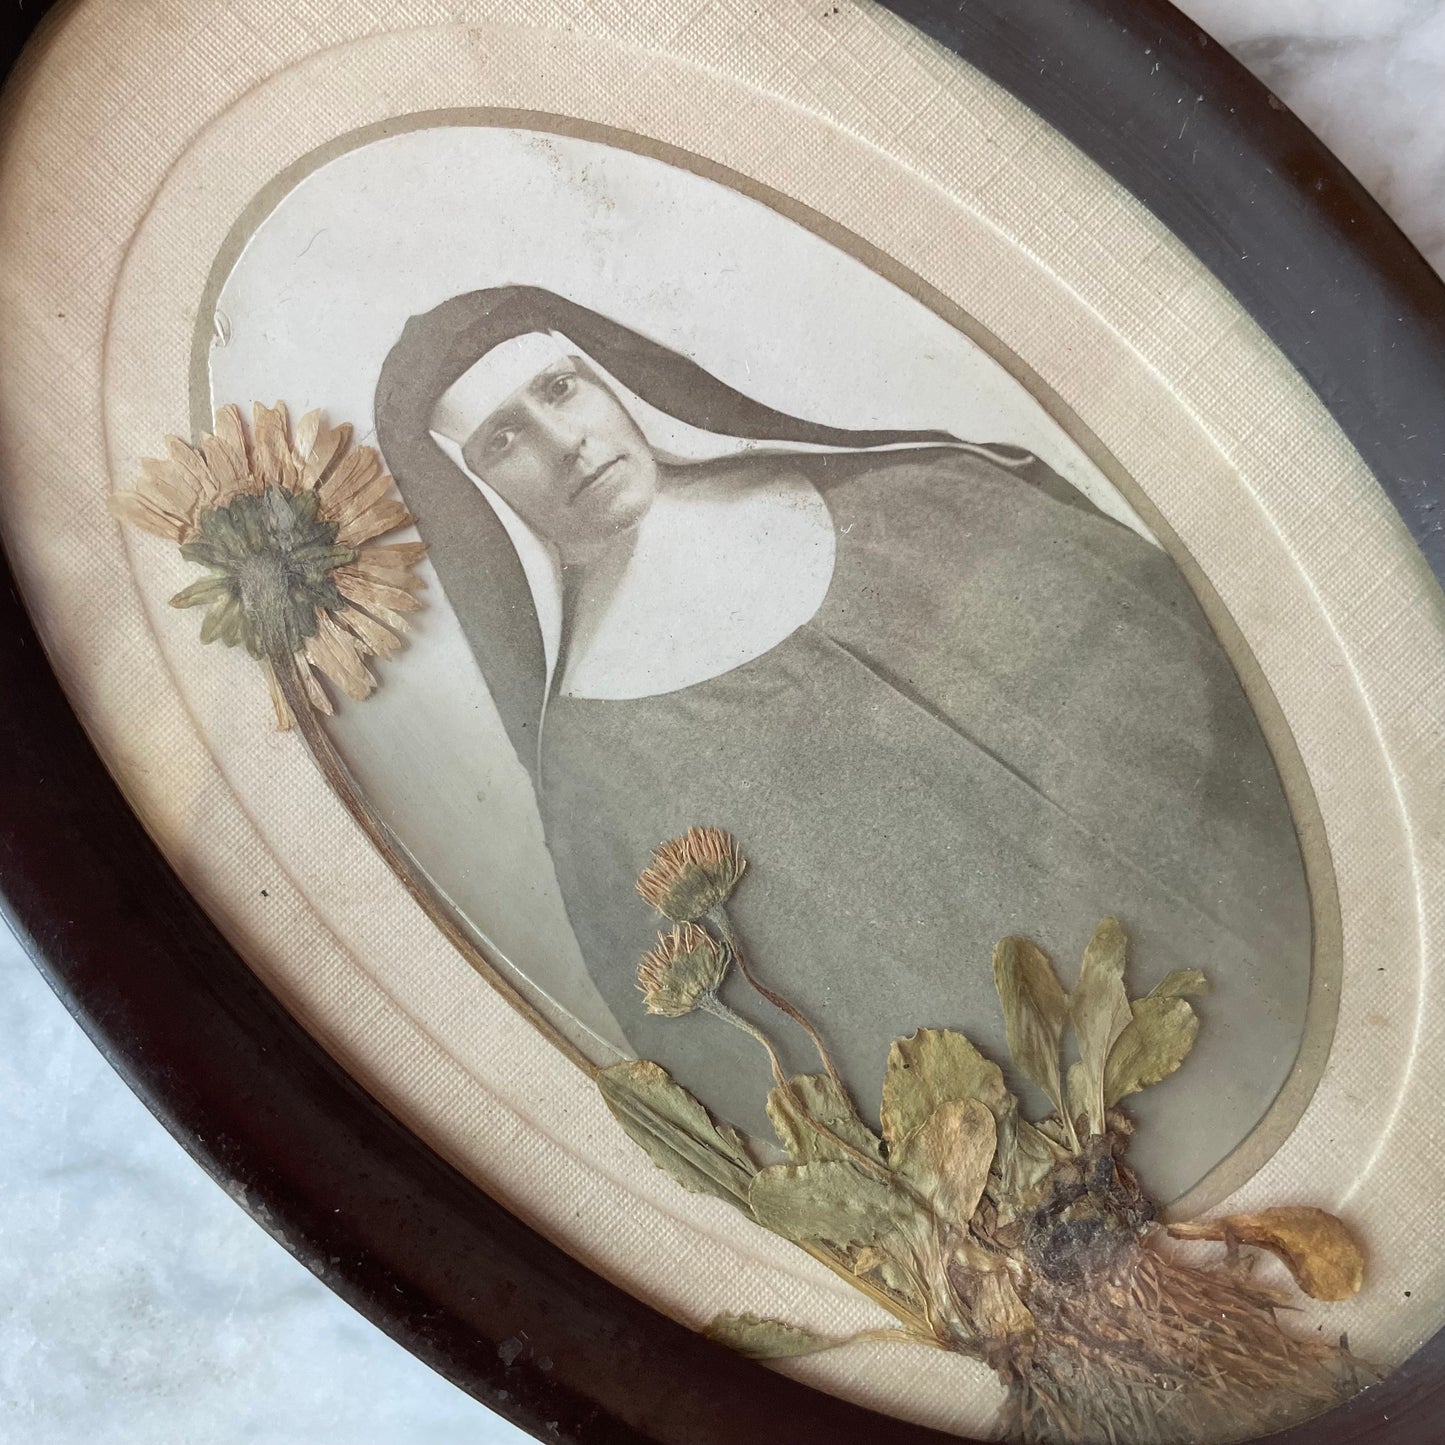 Antique Nun Photo in Oval Frame with Pressed Flowers